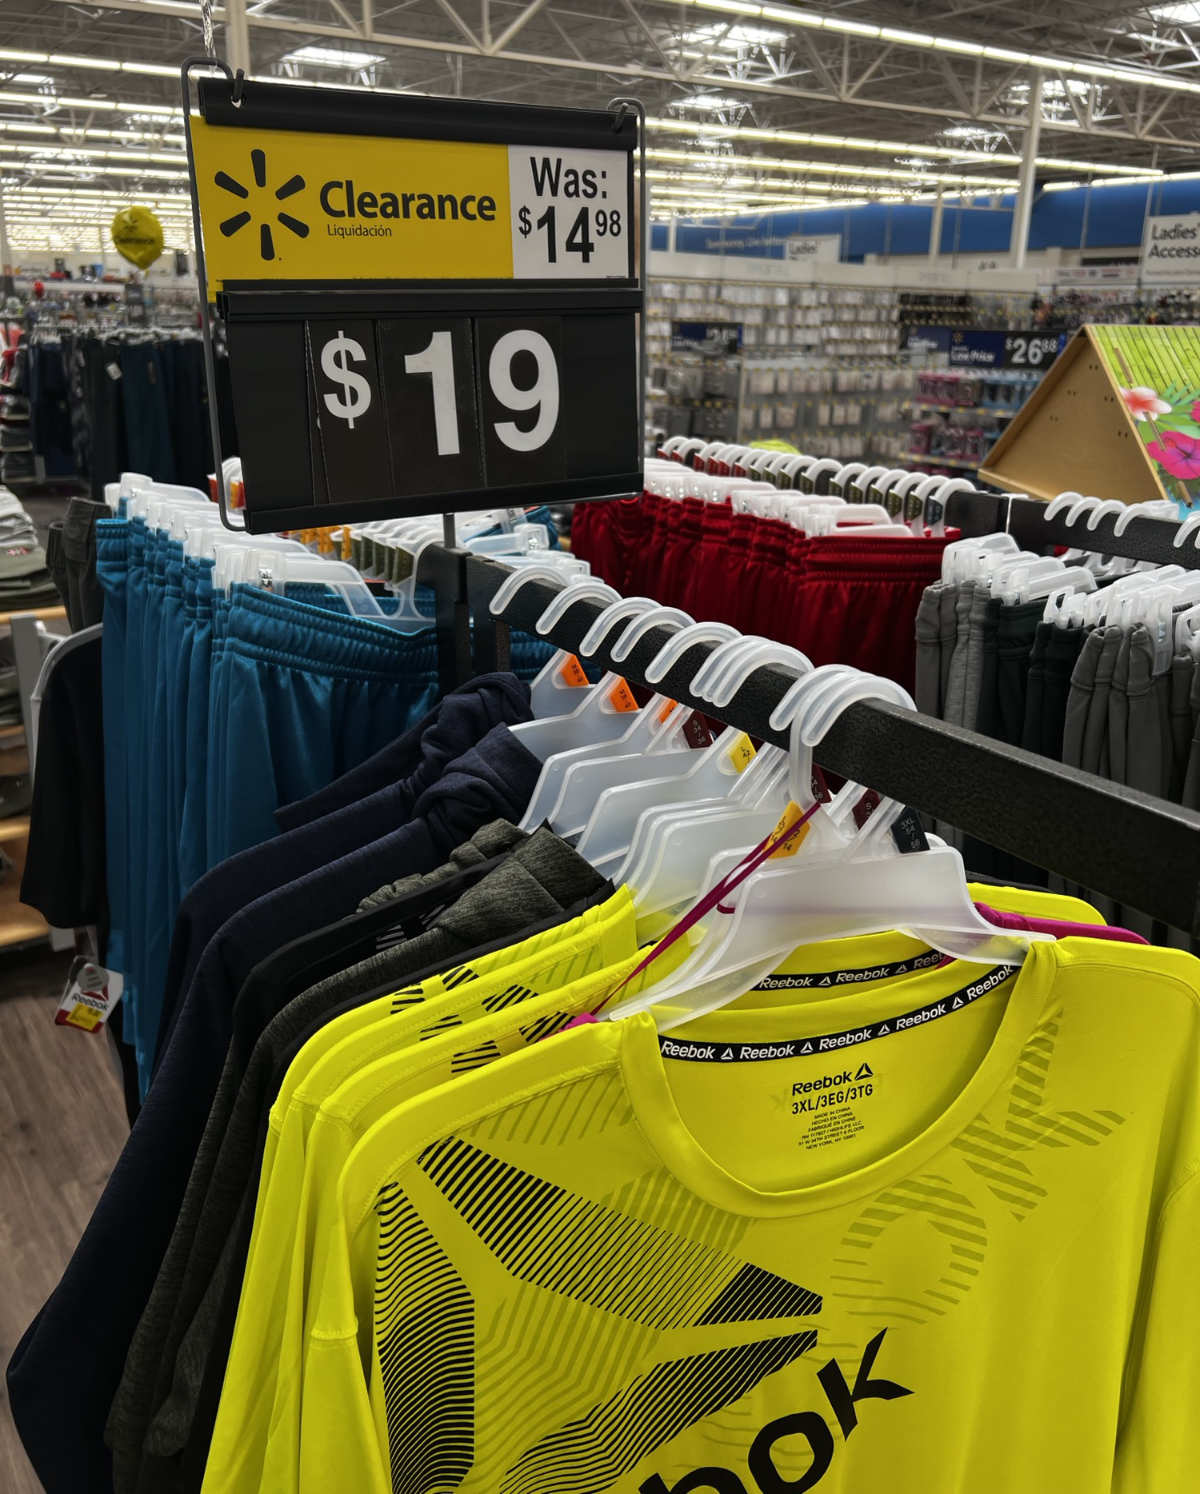 Stopped by WalMart to check out their clearance sale